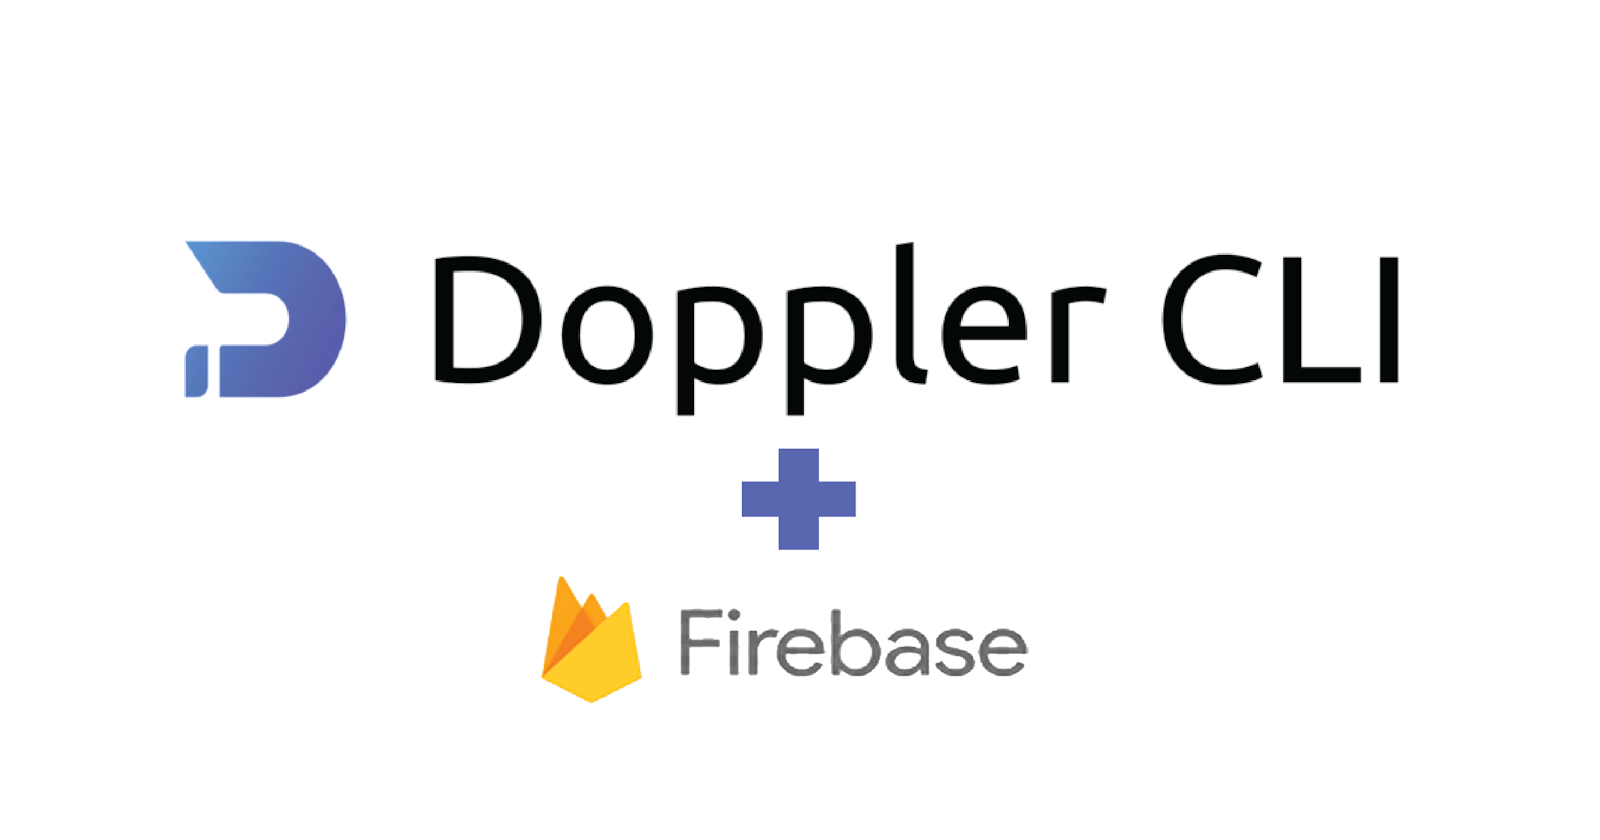 Managing Firebase App Credentials with Doppler